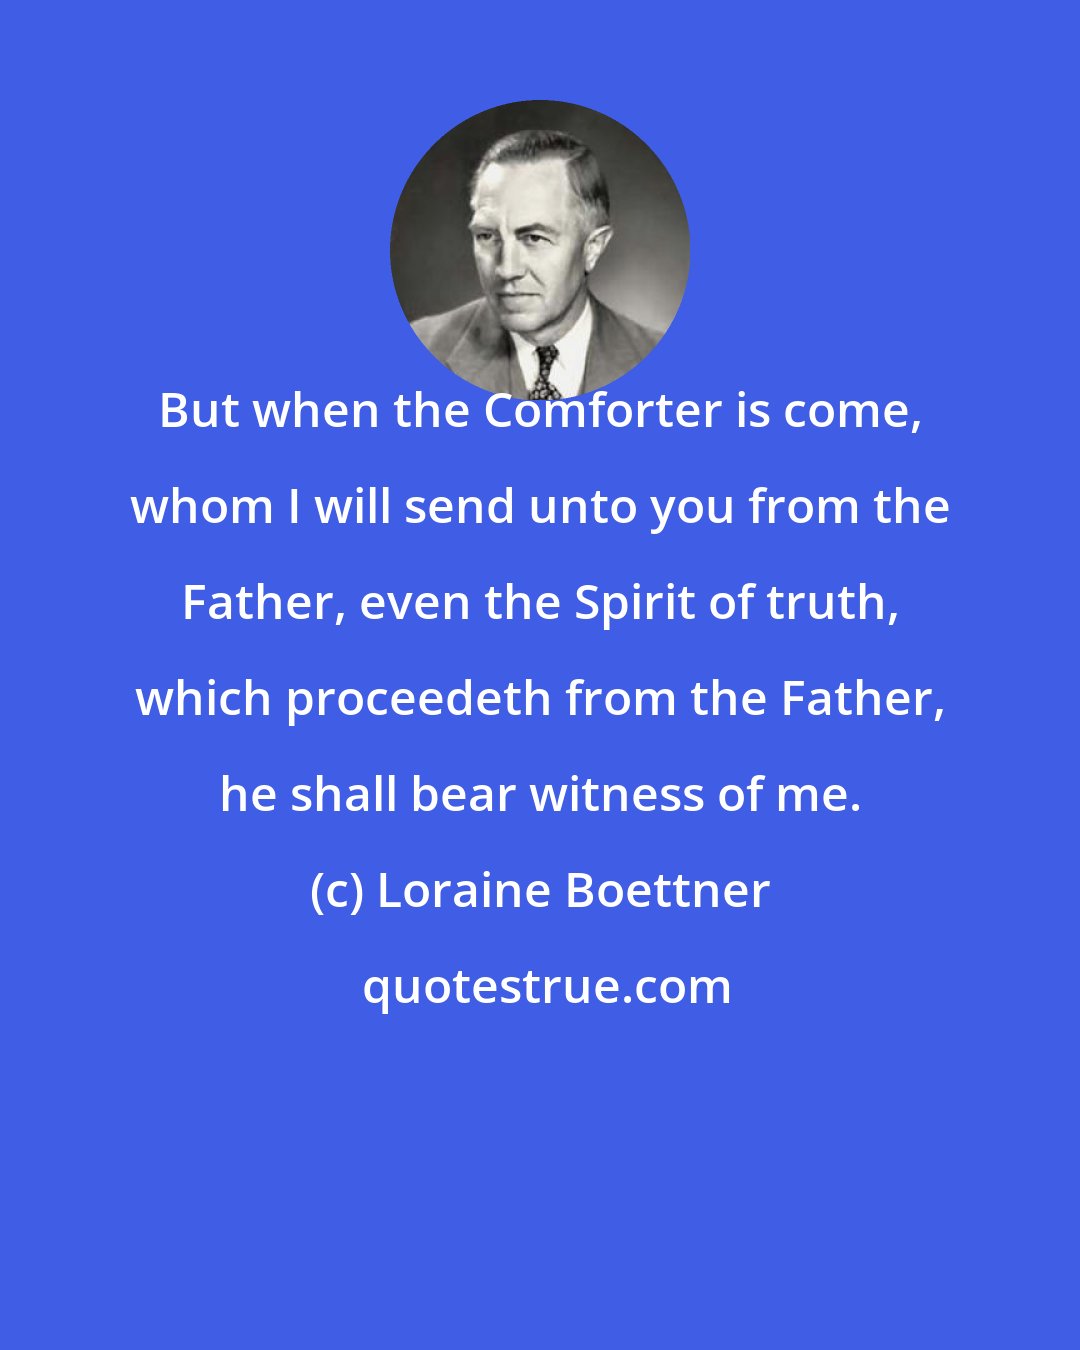 Loraine Boettner: But when the Comforter is come, whom I will send unto you from the Father, even the Spirit of truth, which proceedeth from the Father, he shall bear witness of me.